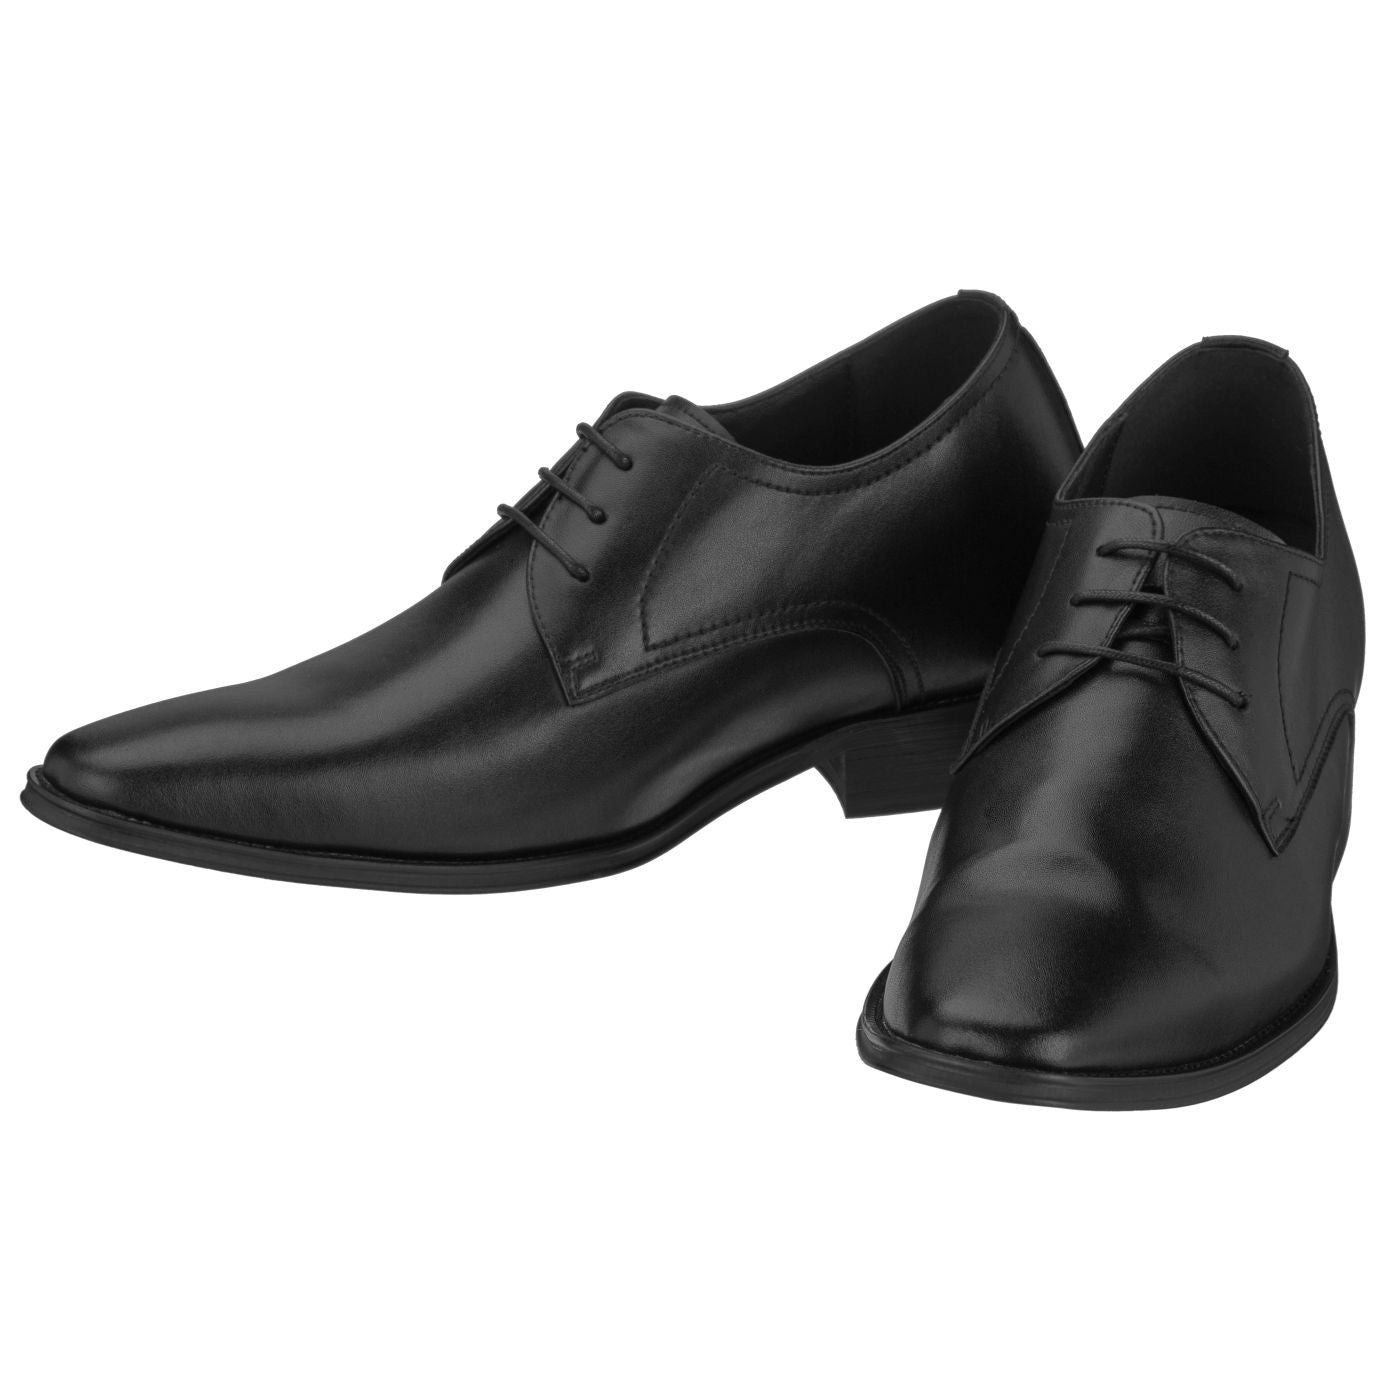 Elevator shoes height increase CALTO - Y5011 - 2.8 Inches Taller (Black)